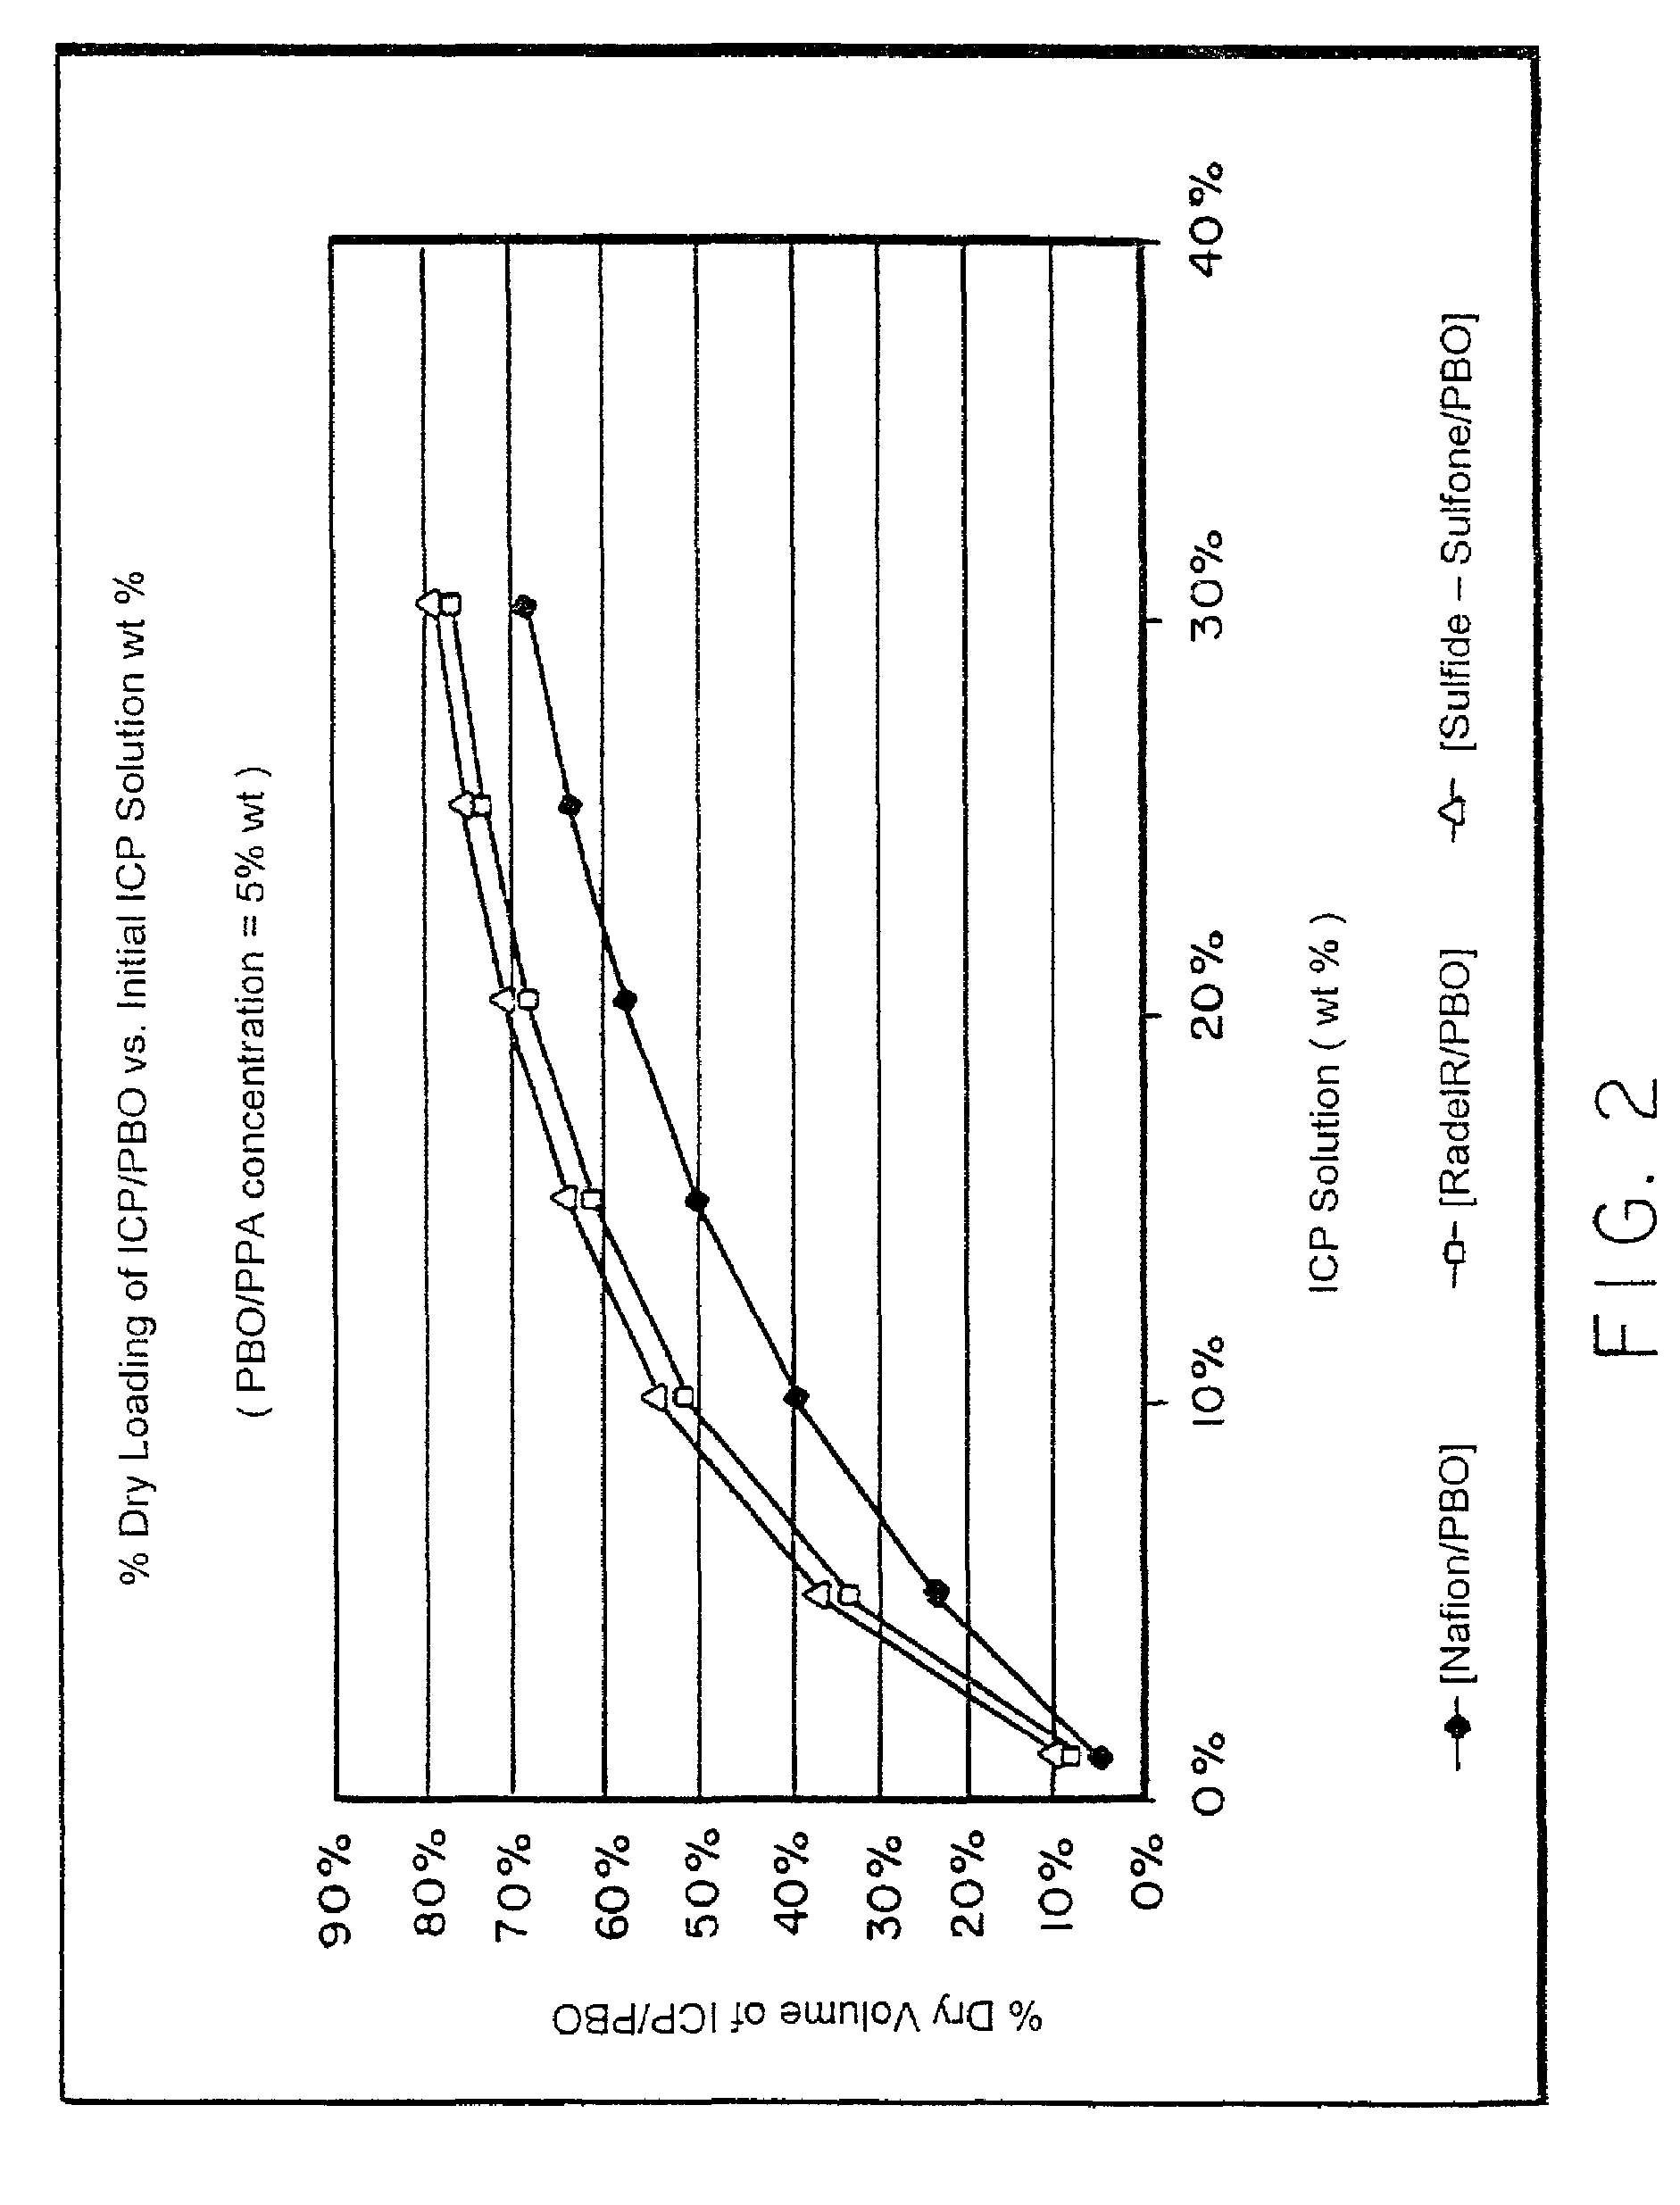 Composite solid polymer electrolyte membranes